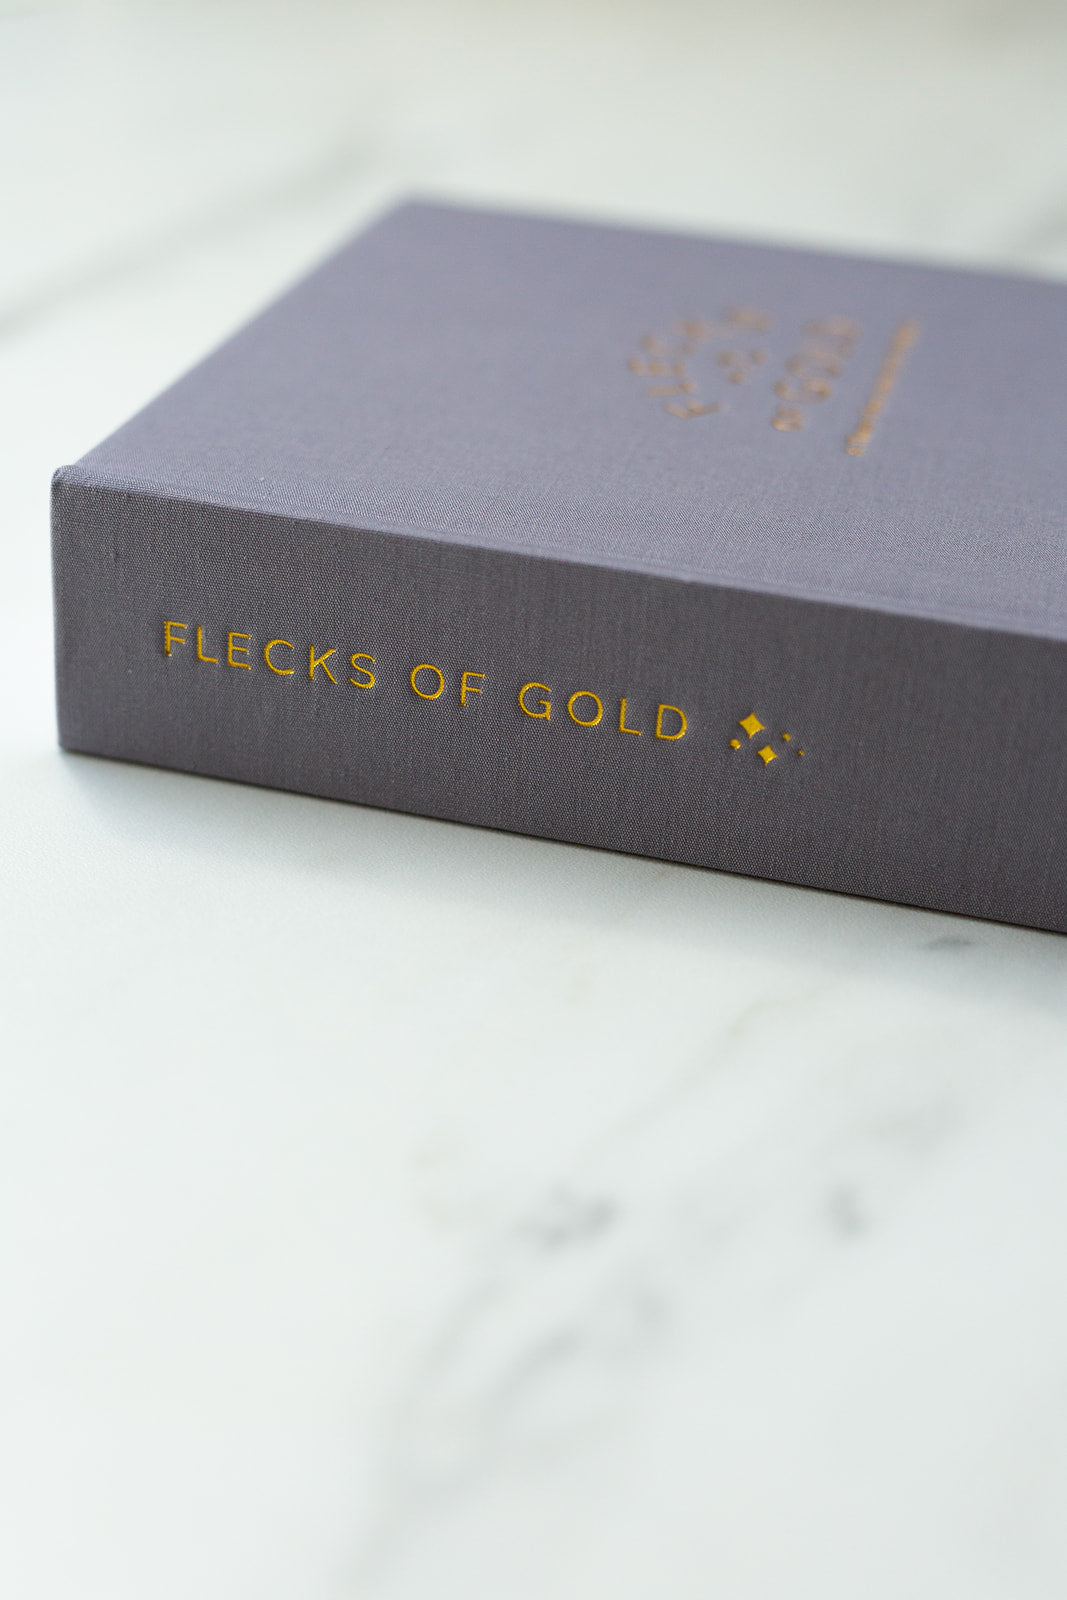 Beautiful Flecks of Gold Journal.  Motherhood journal created by Rachel Nielson (host of the 3 in 30 Takeaways for Moms Podcast).  A journal to help overwhelmed moms see the good, the magic, the gold in their everyday lives.  Gold embossing.